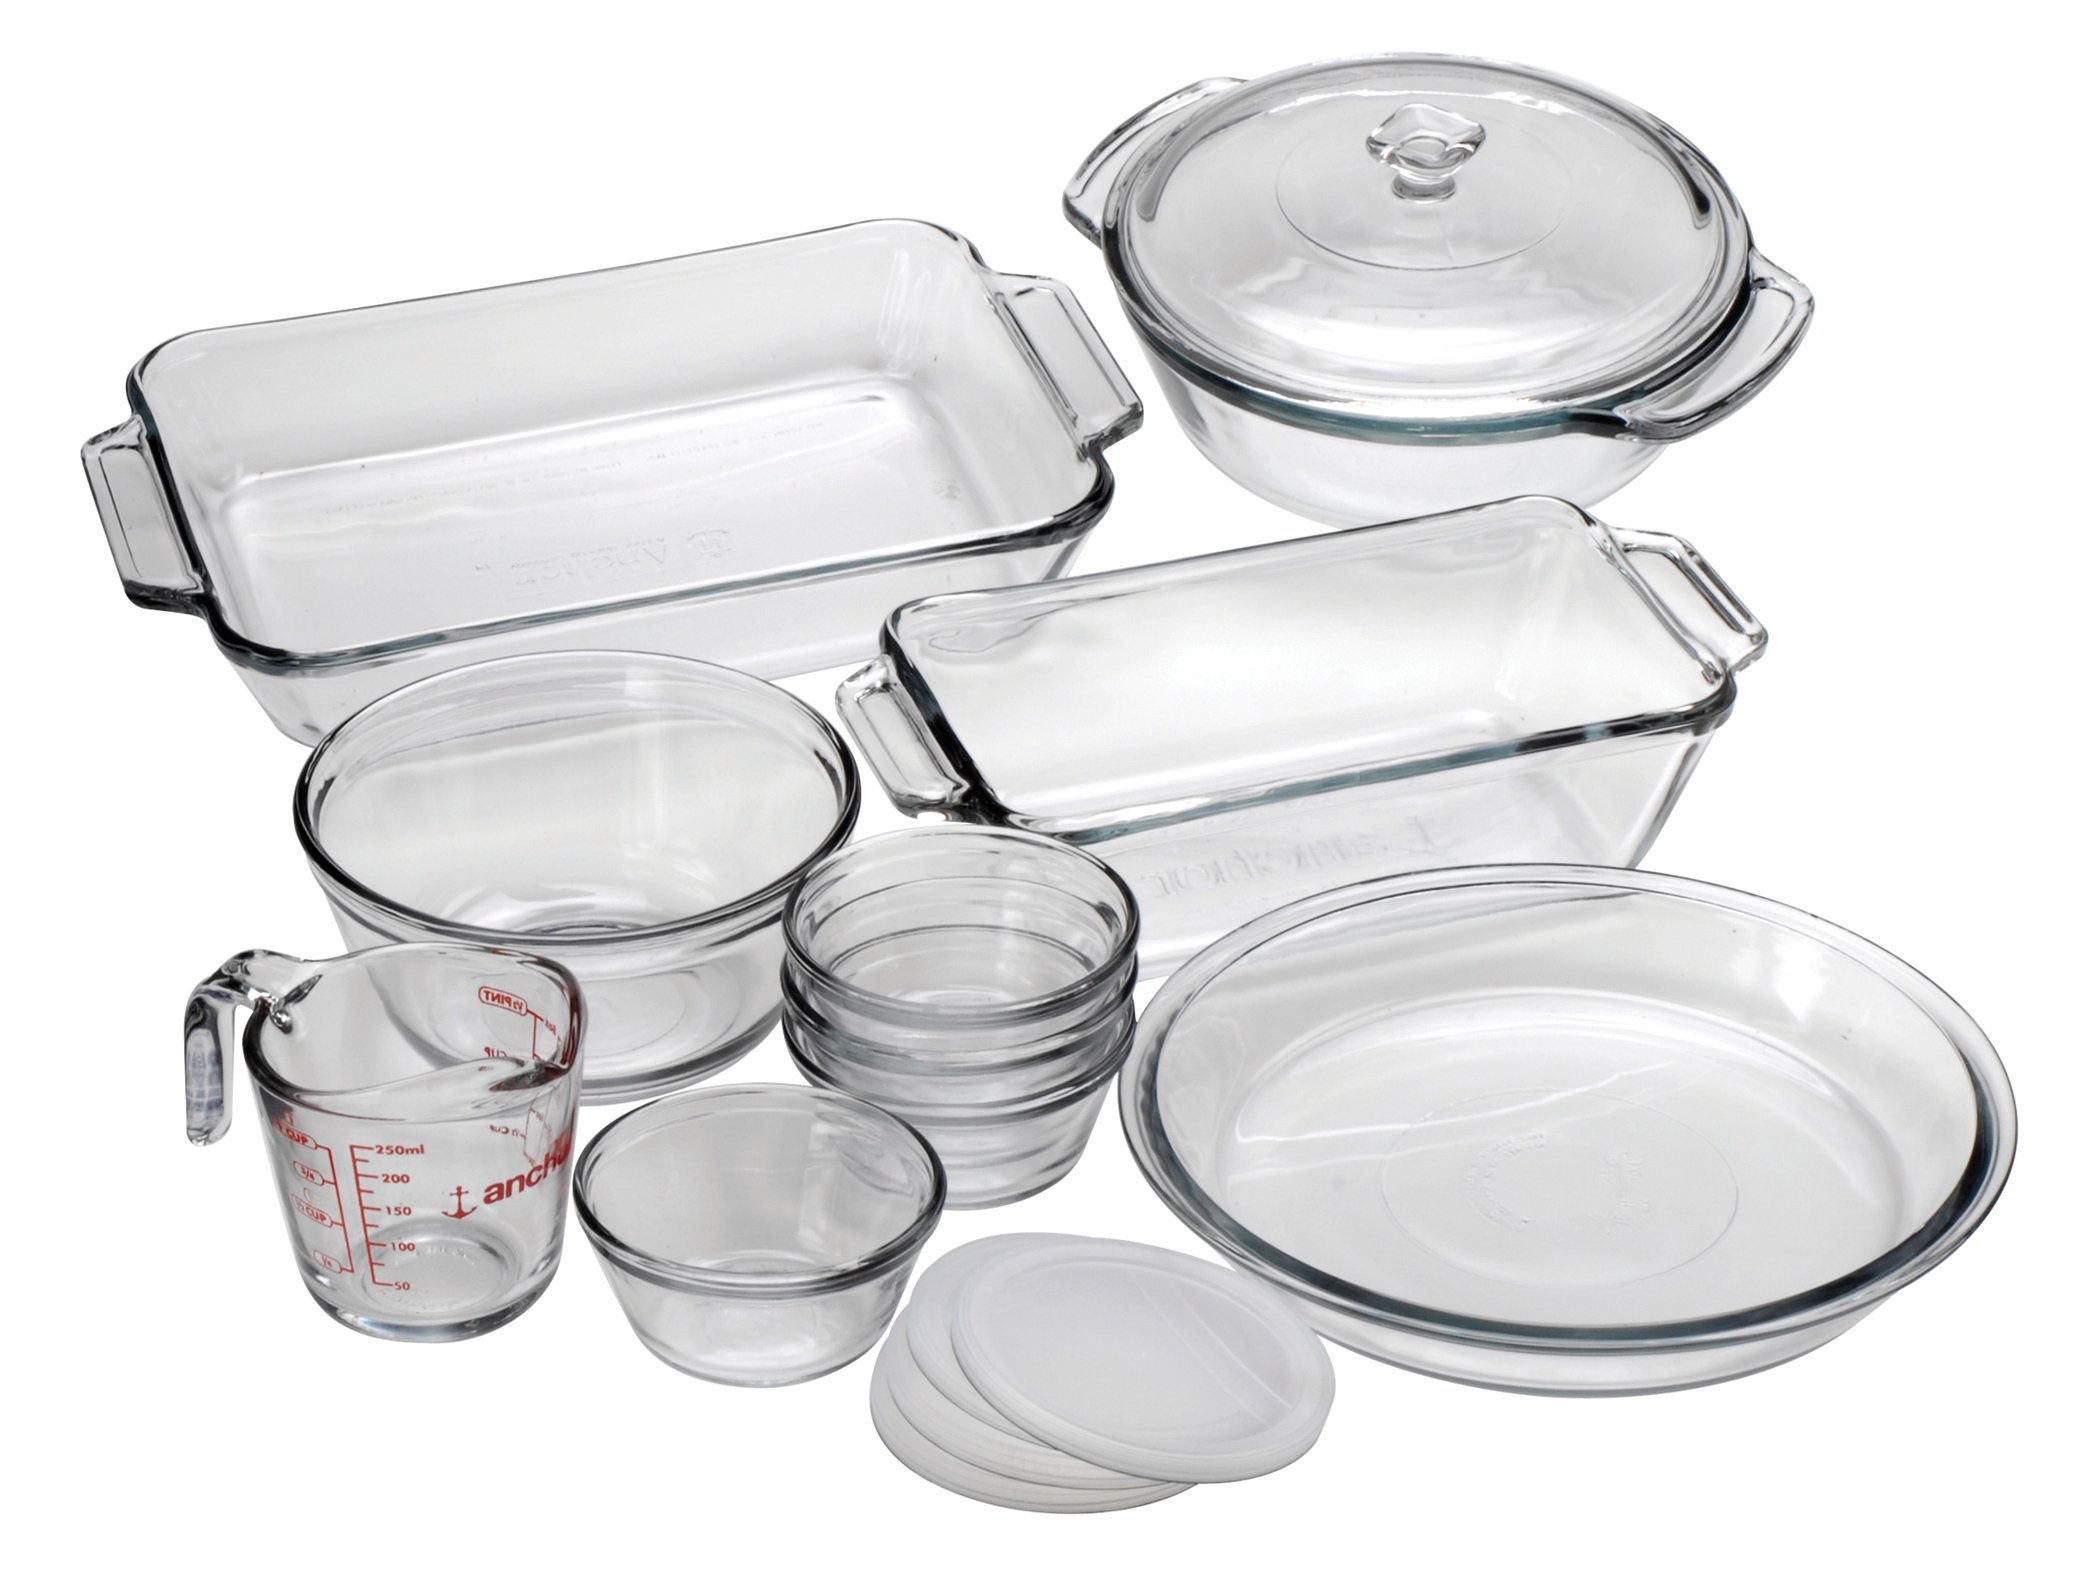 Anchor Hocking Complete Glass Bakeware Set (15 piece, tempered tough, pre-heated oven and dishwasher safe)